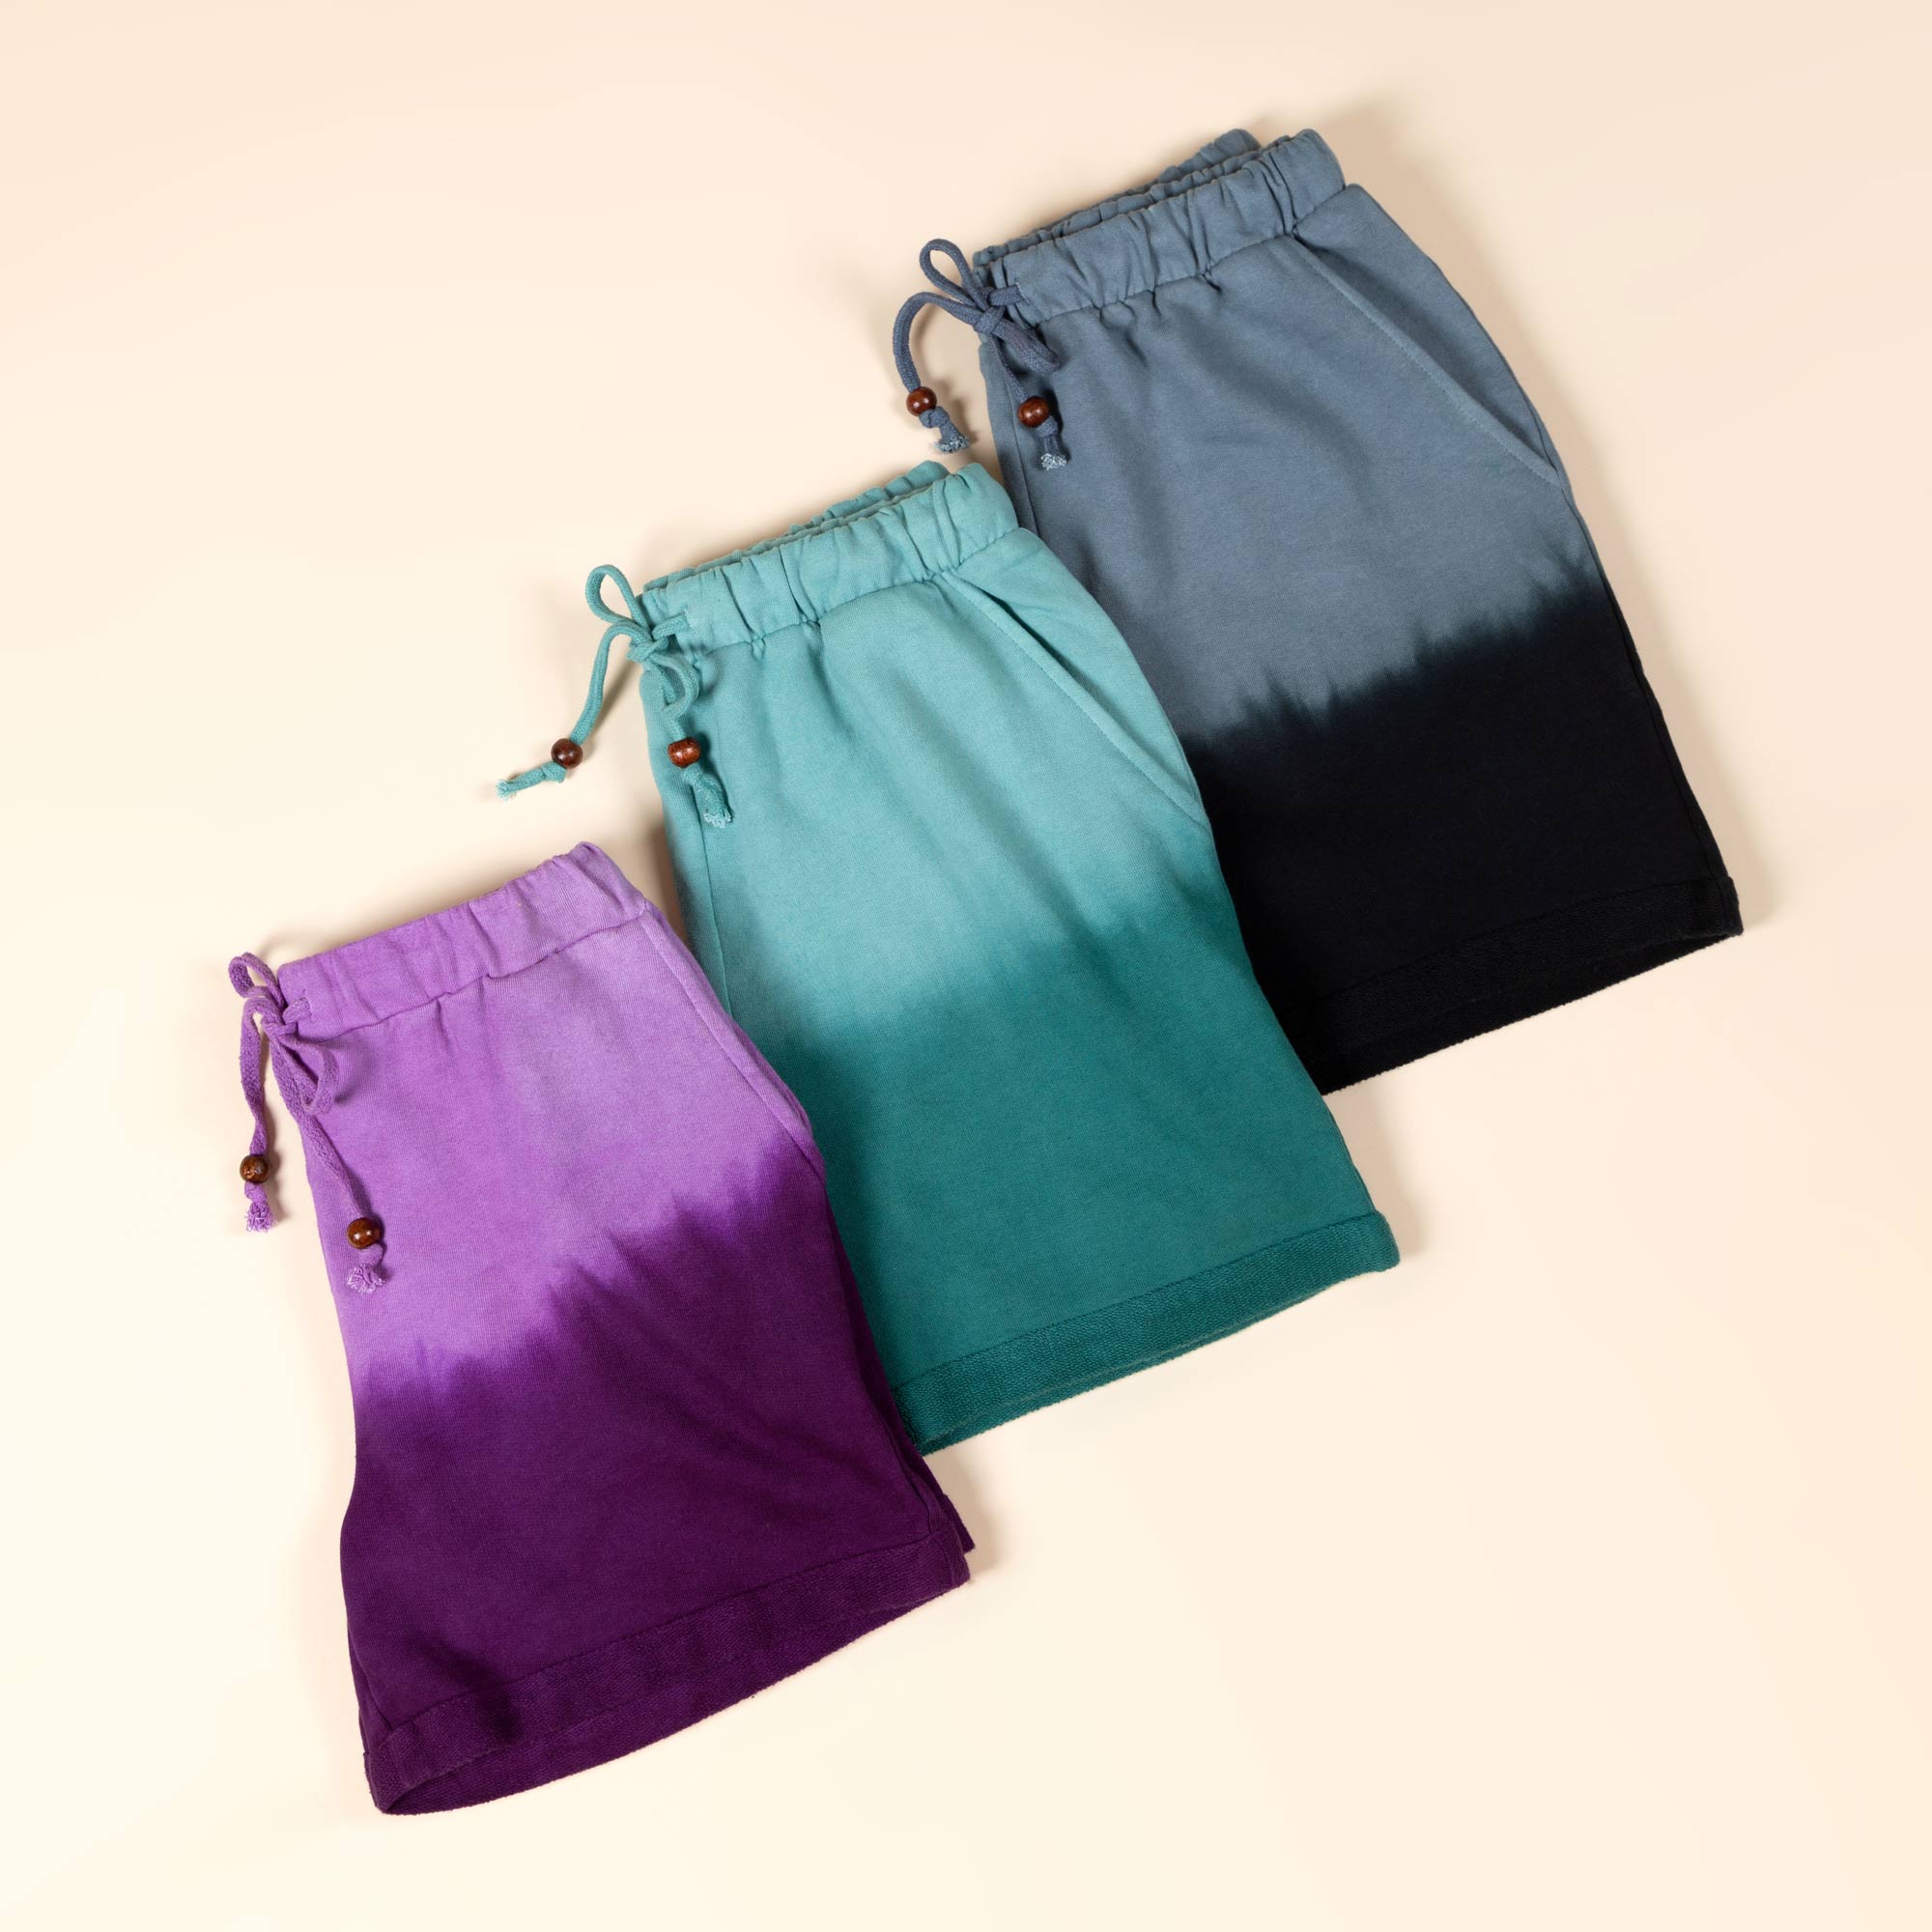 Three pairs of tie-dye shorts foldered in half and laid flat